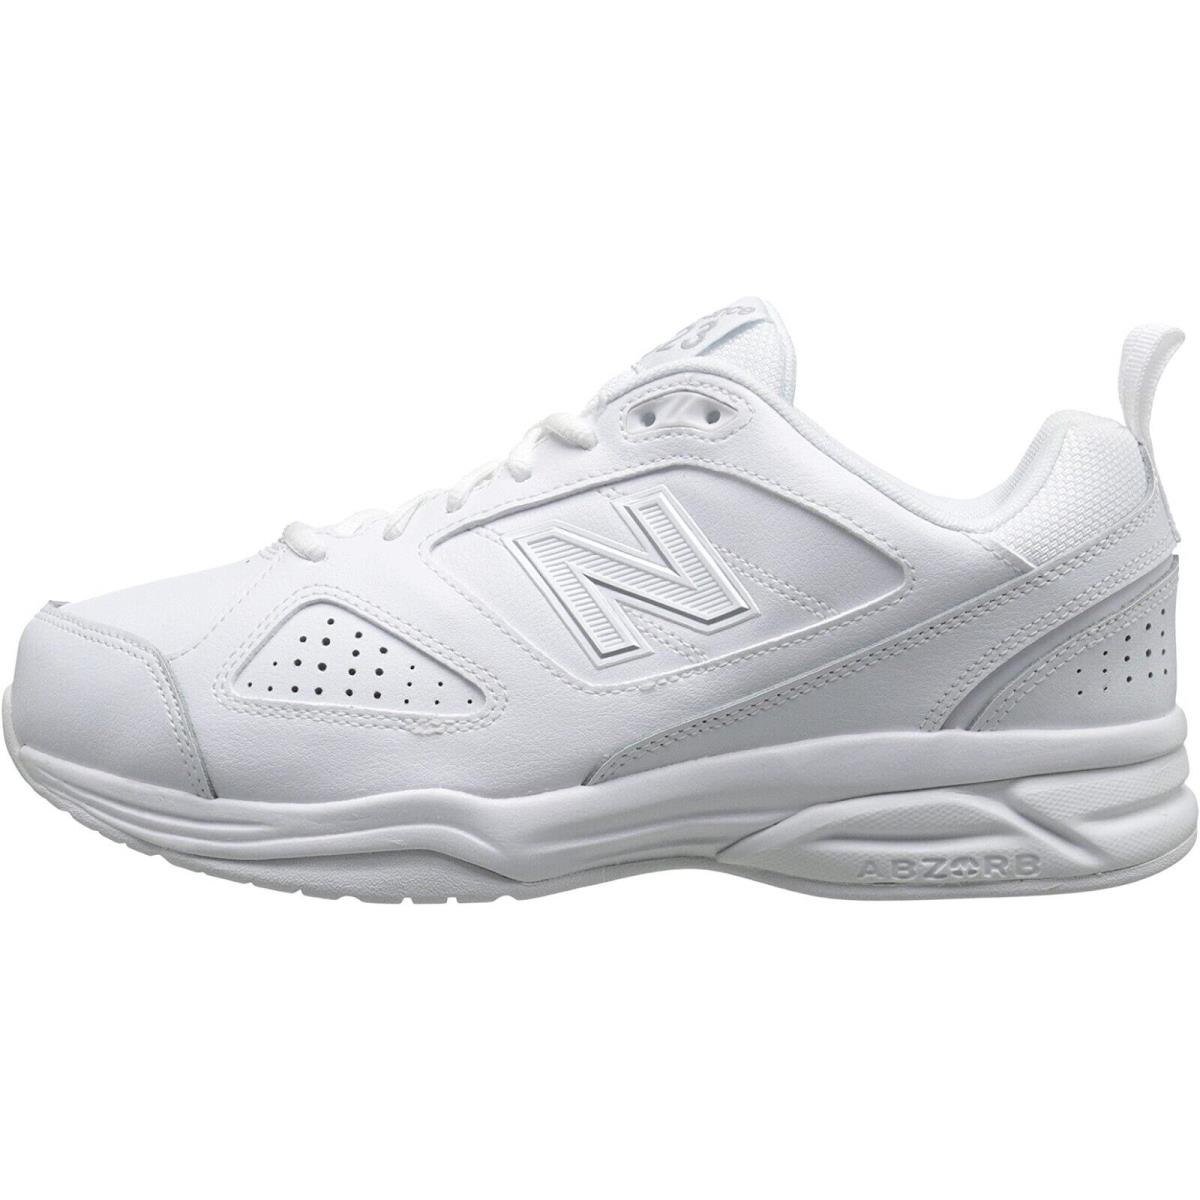 New Balance N7770 Mens White Leather Training Shoes Size 12 D